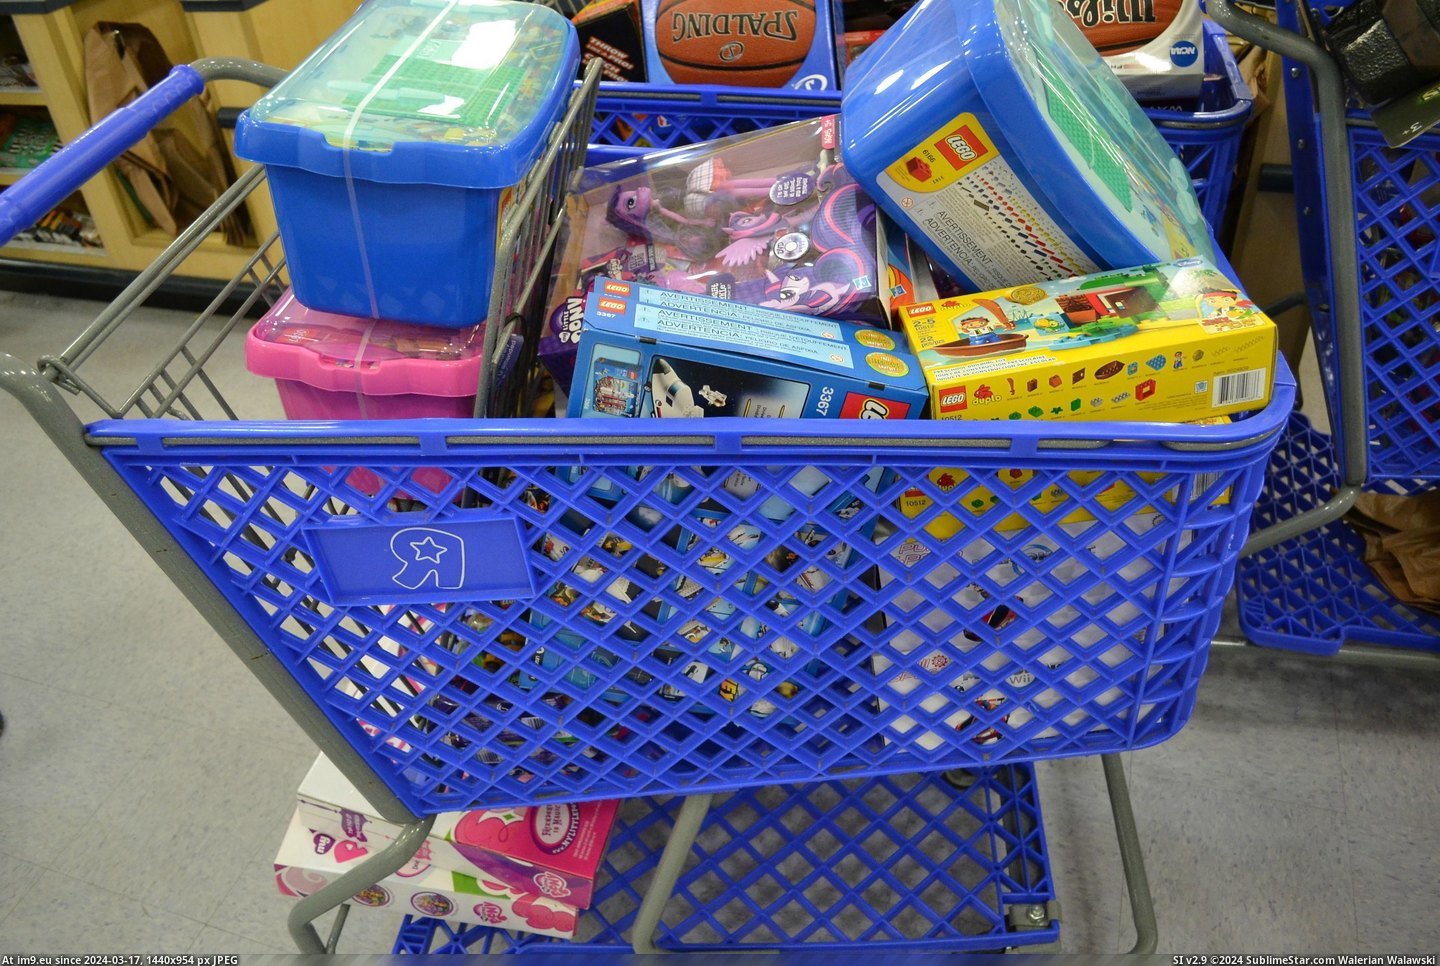 #For #Happy #All #Bunch #Tots #Donated #Christmas #Toys #Kids [Pics] Hopefully this makes a bunch of kids happy this Christmas all donated to Toys for Tots. 4 Pic. (Bild von album My r/PICS favs))